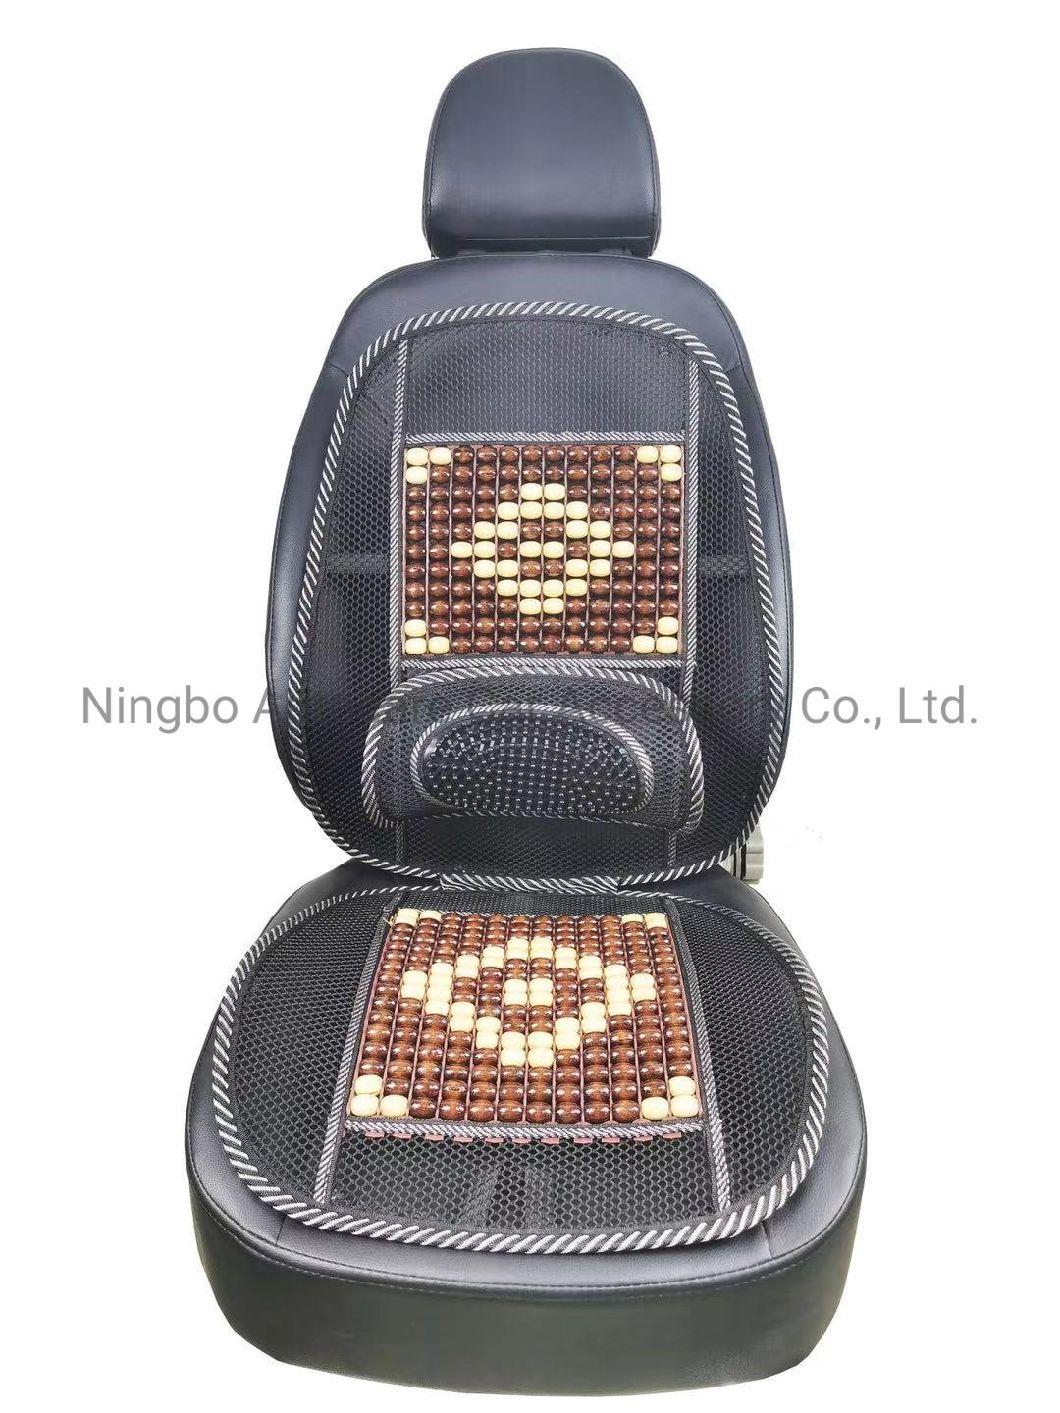 Wooden Beads Seat Cushion High Quality Wooden Beads Seat Cushion